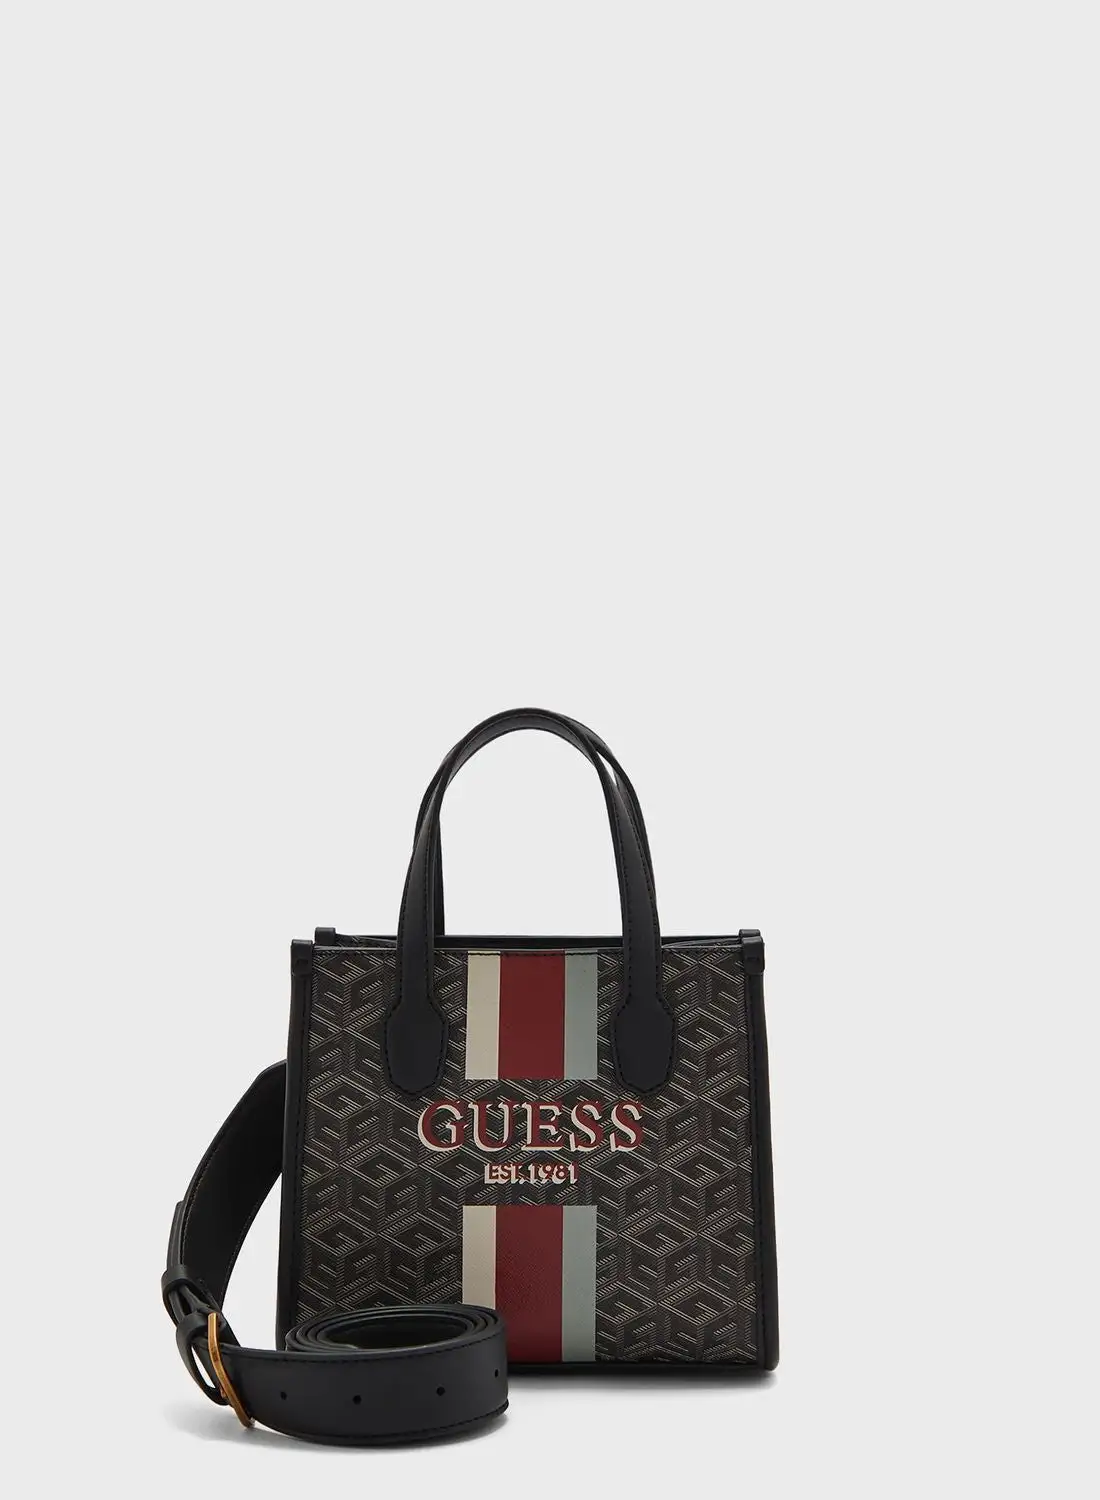 GUESS Top Handle Tote